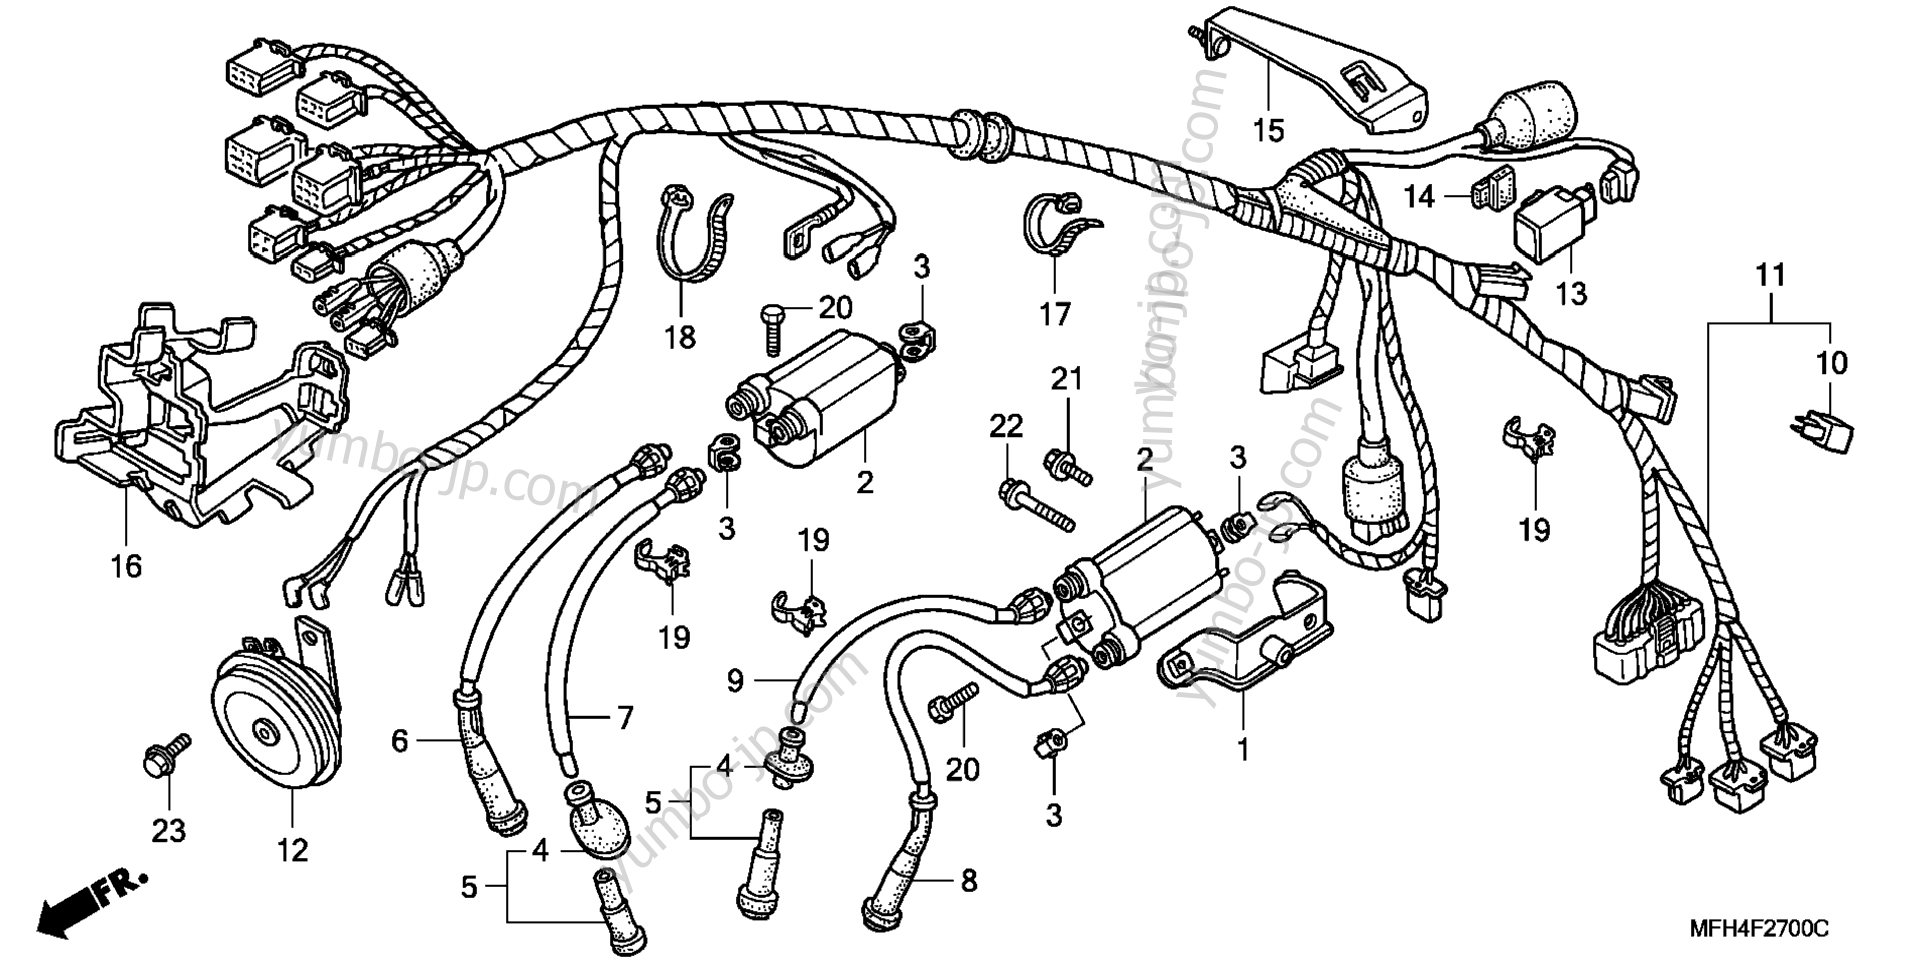 WIRE HARNESS for motorcycles HONDA VT600C A 2007 year